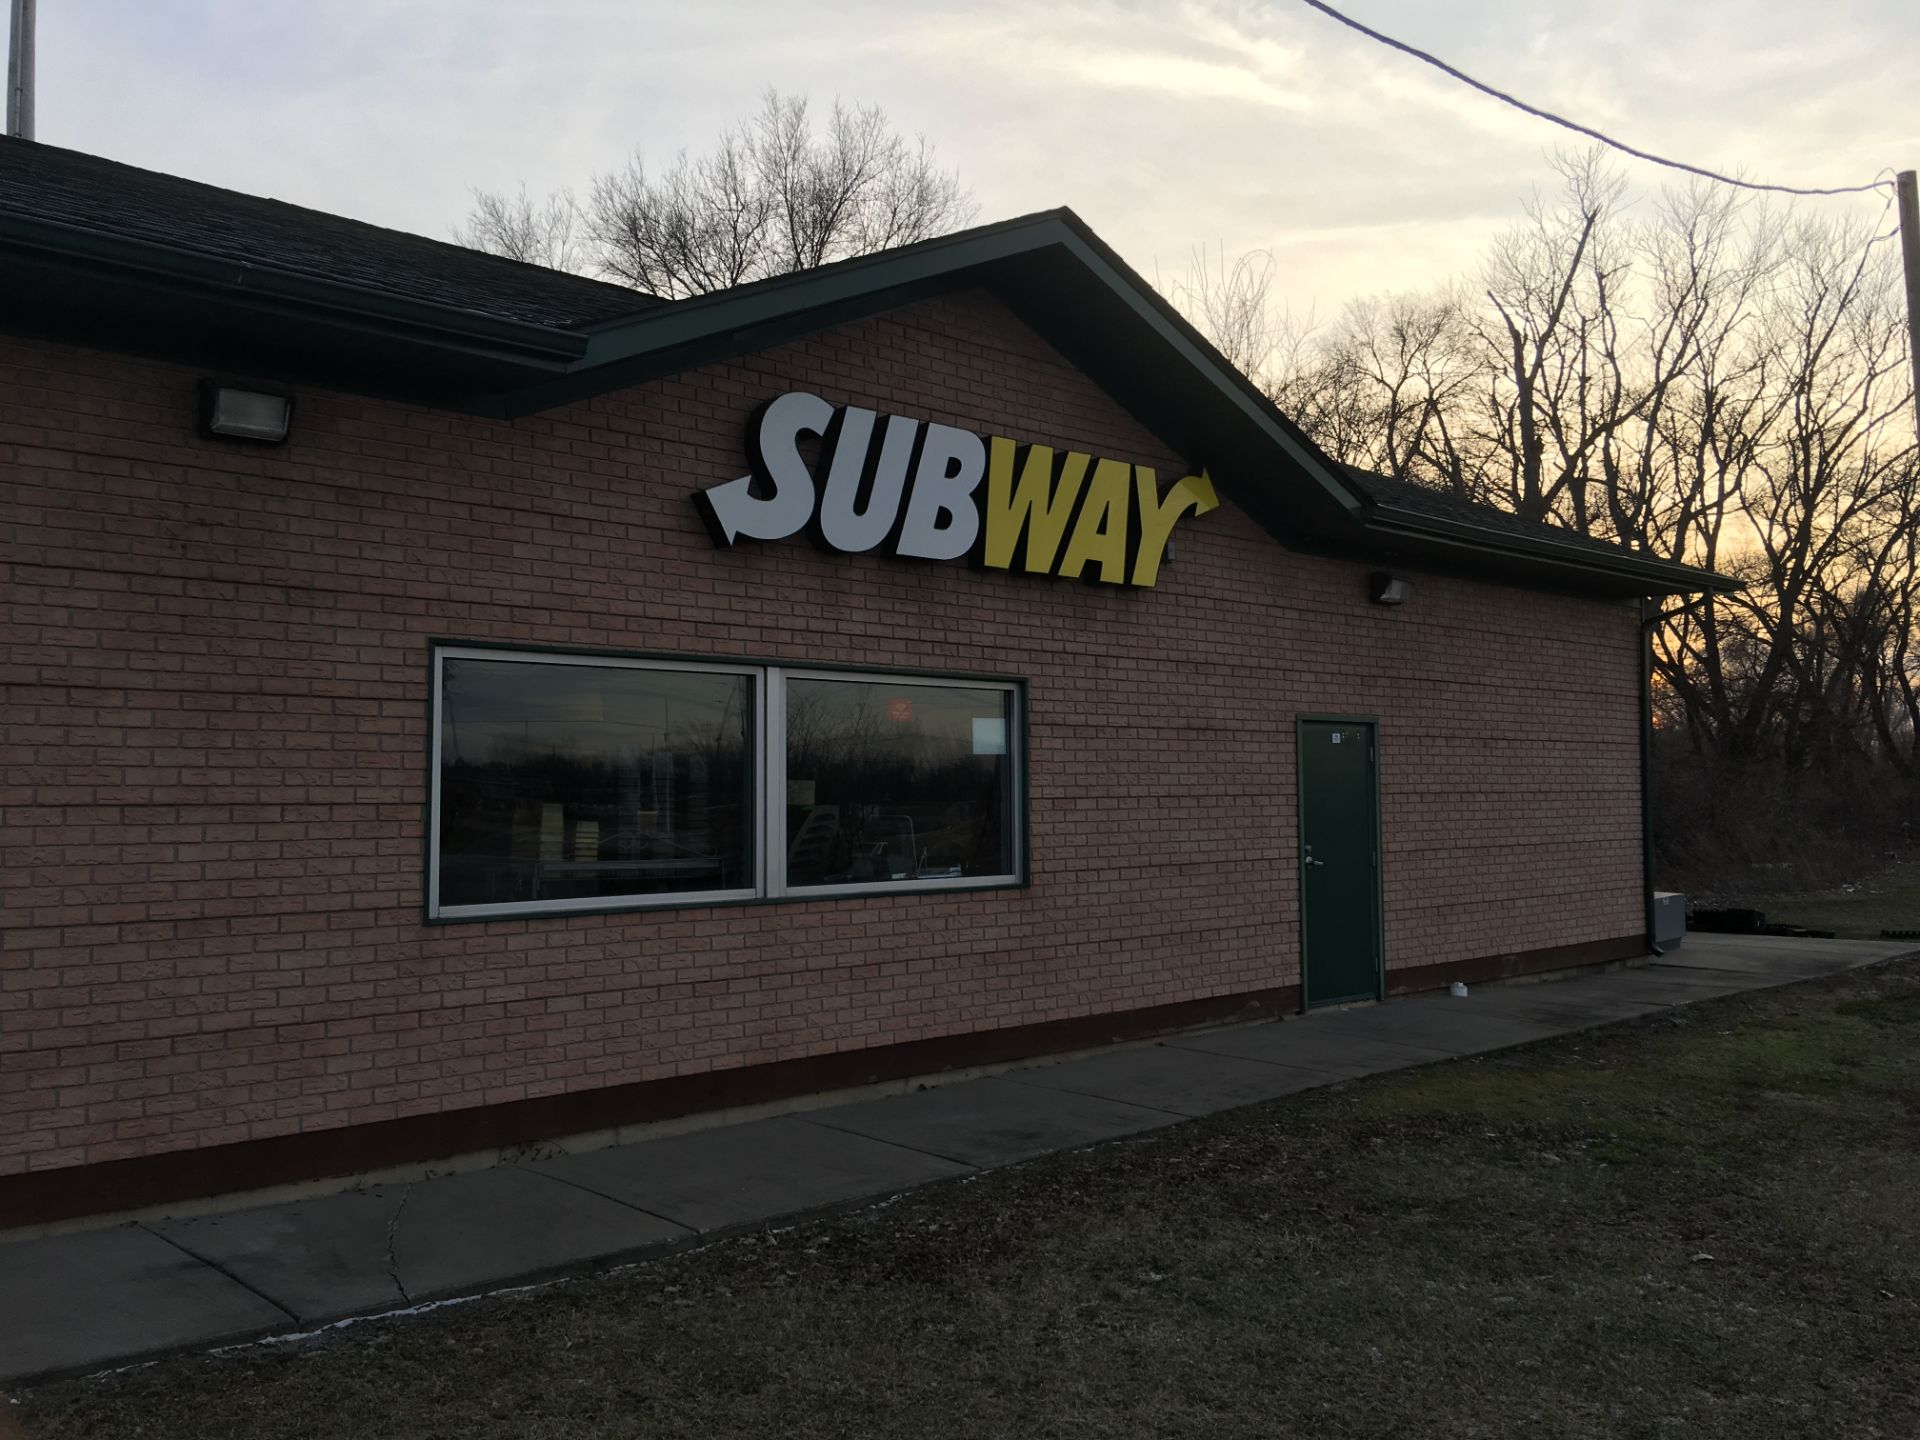 2 SUBWAY store front signs - Image 2 of 2